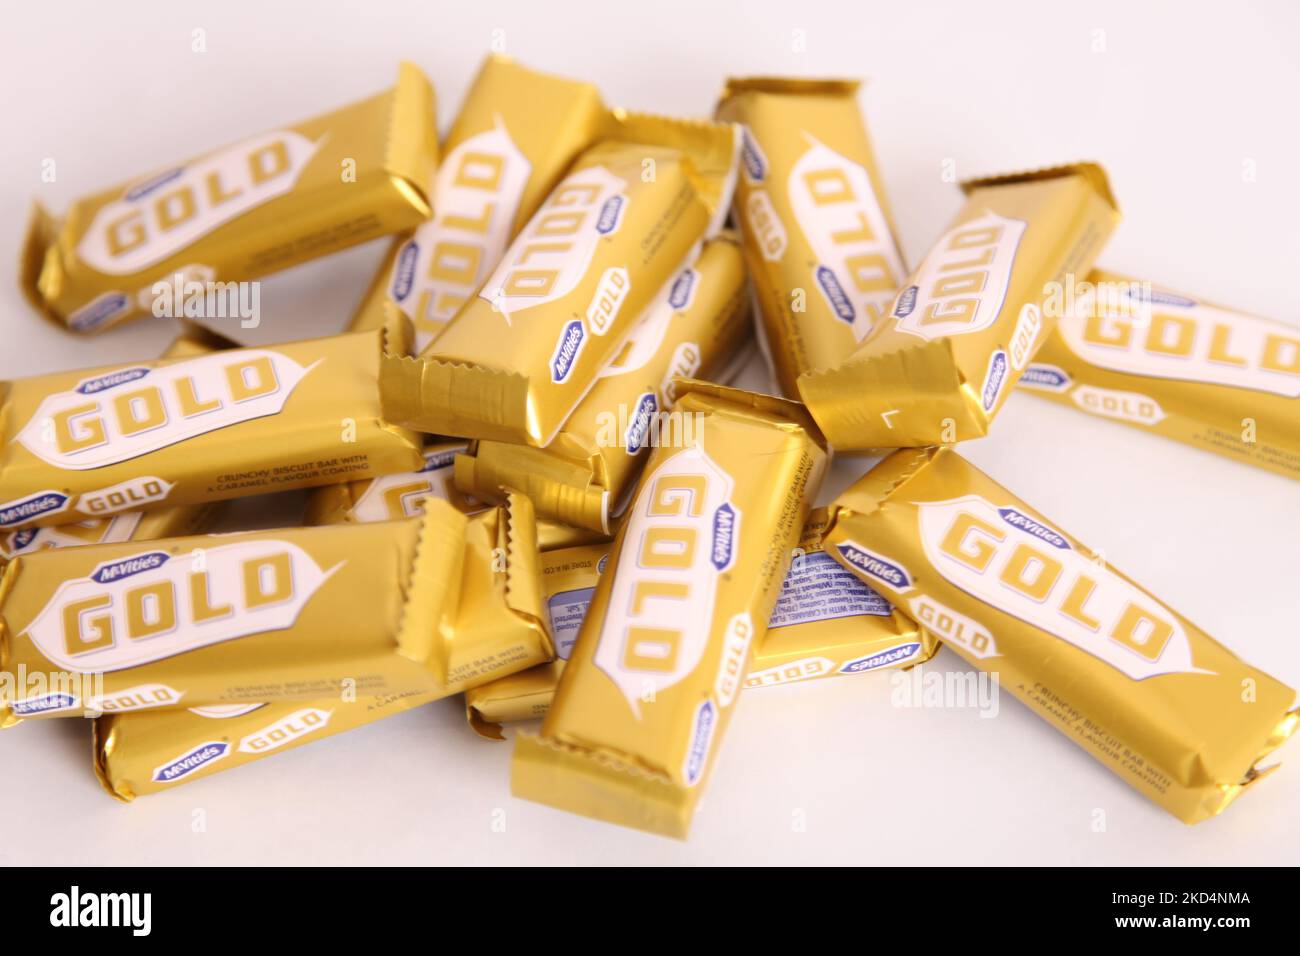 Stack of McVities Gold Bars in rough pile - multiple golden chocolate bar snack treat Stock Photo